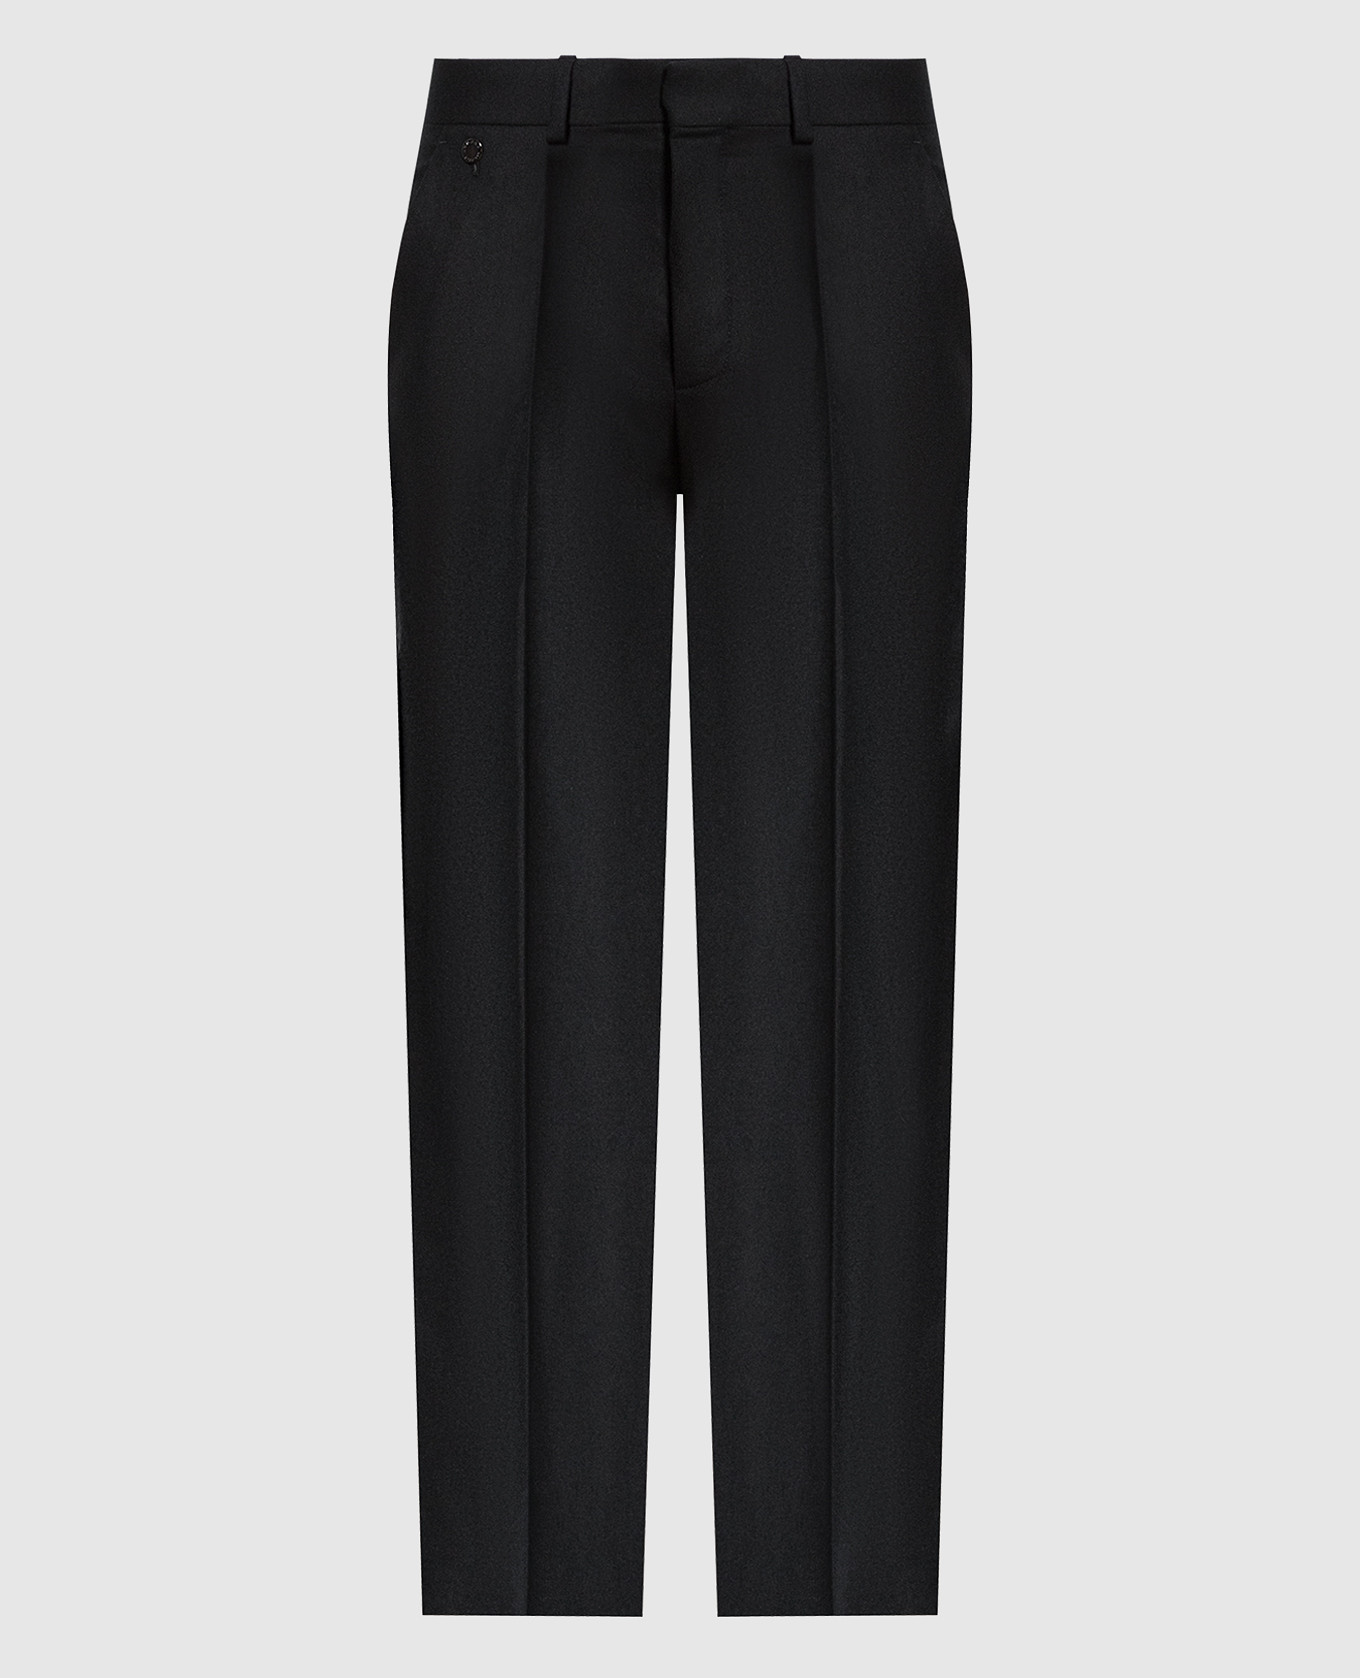 Black pants made of wool and cashmere